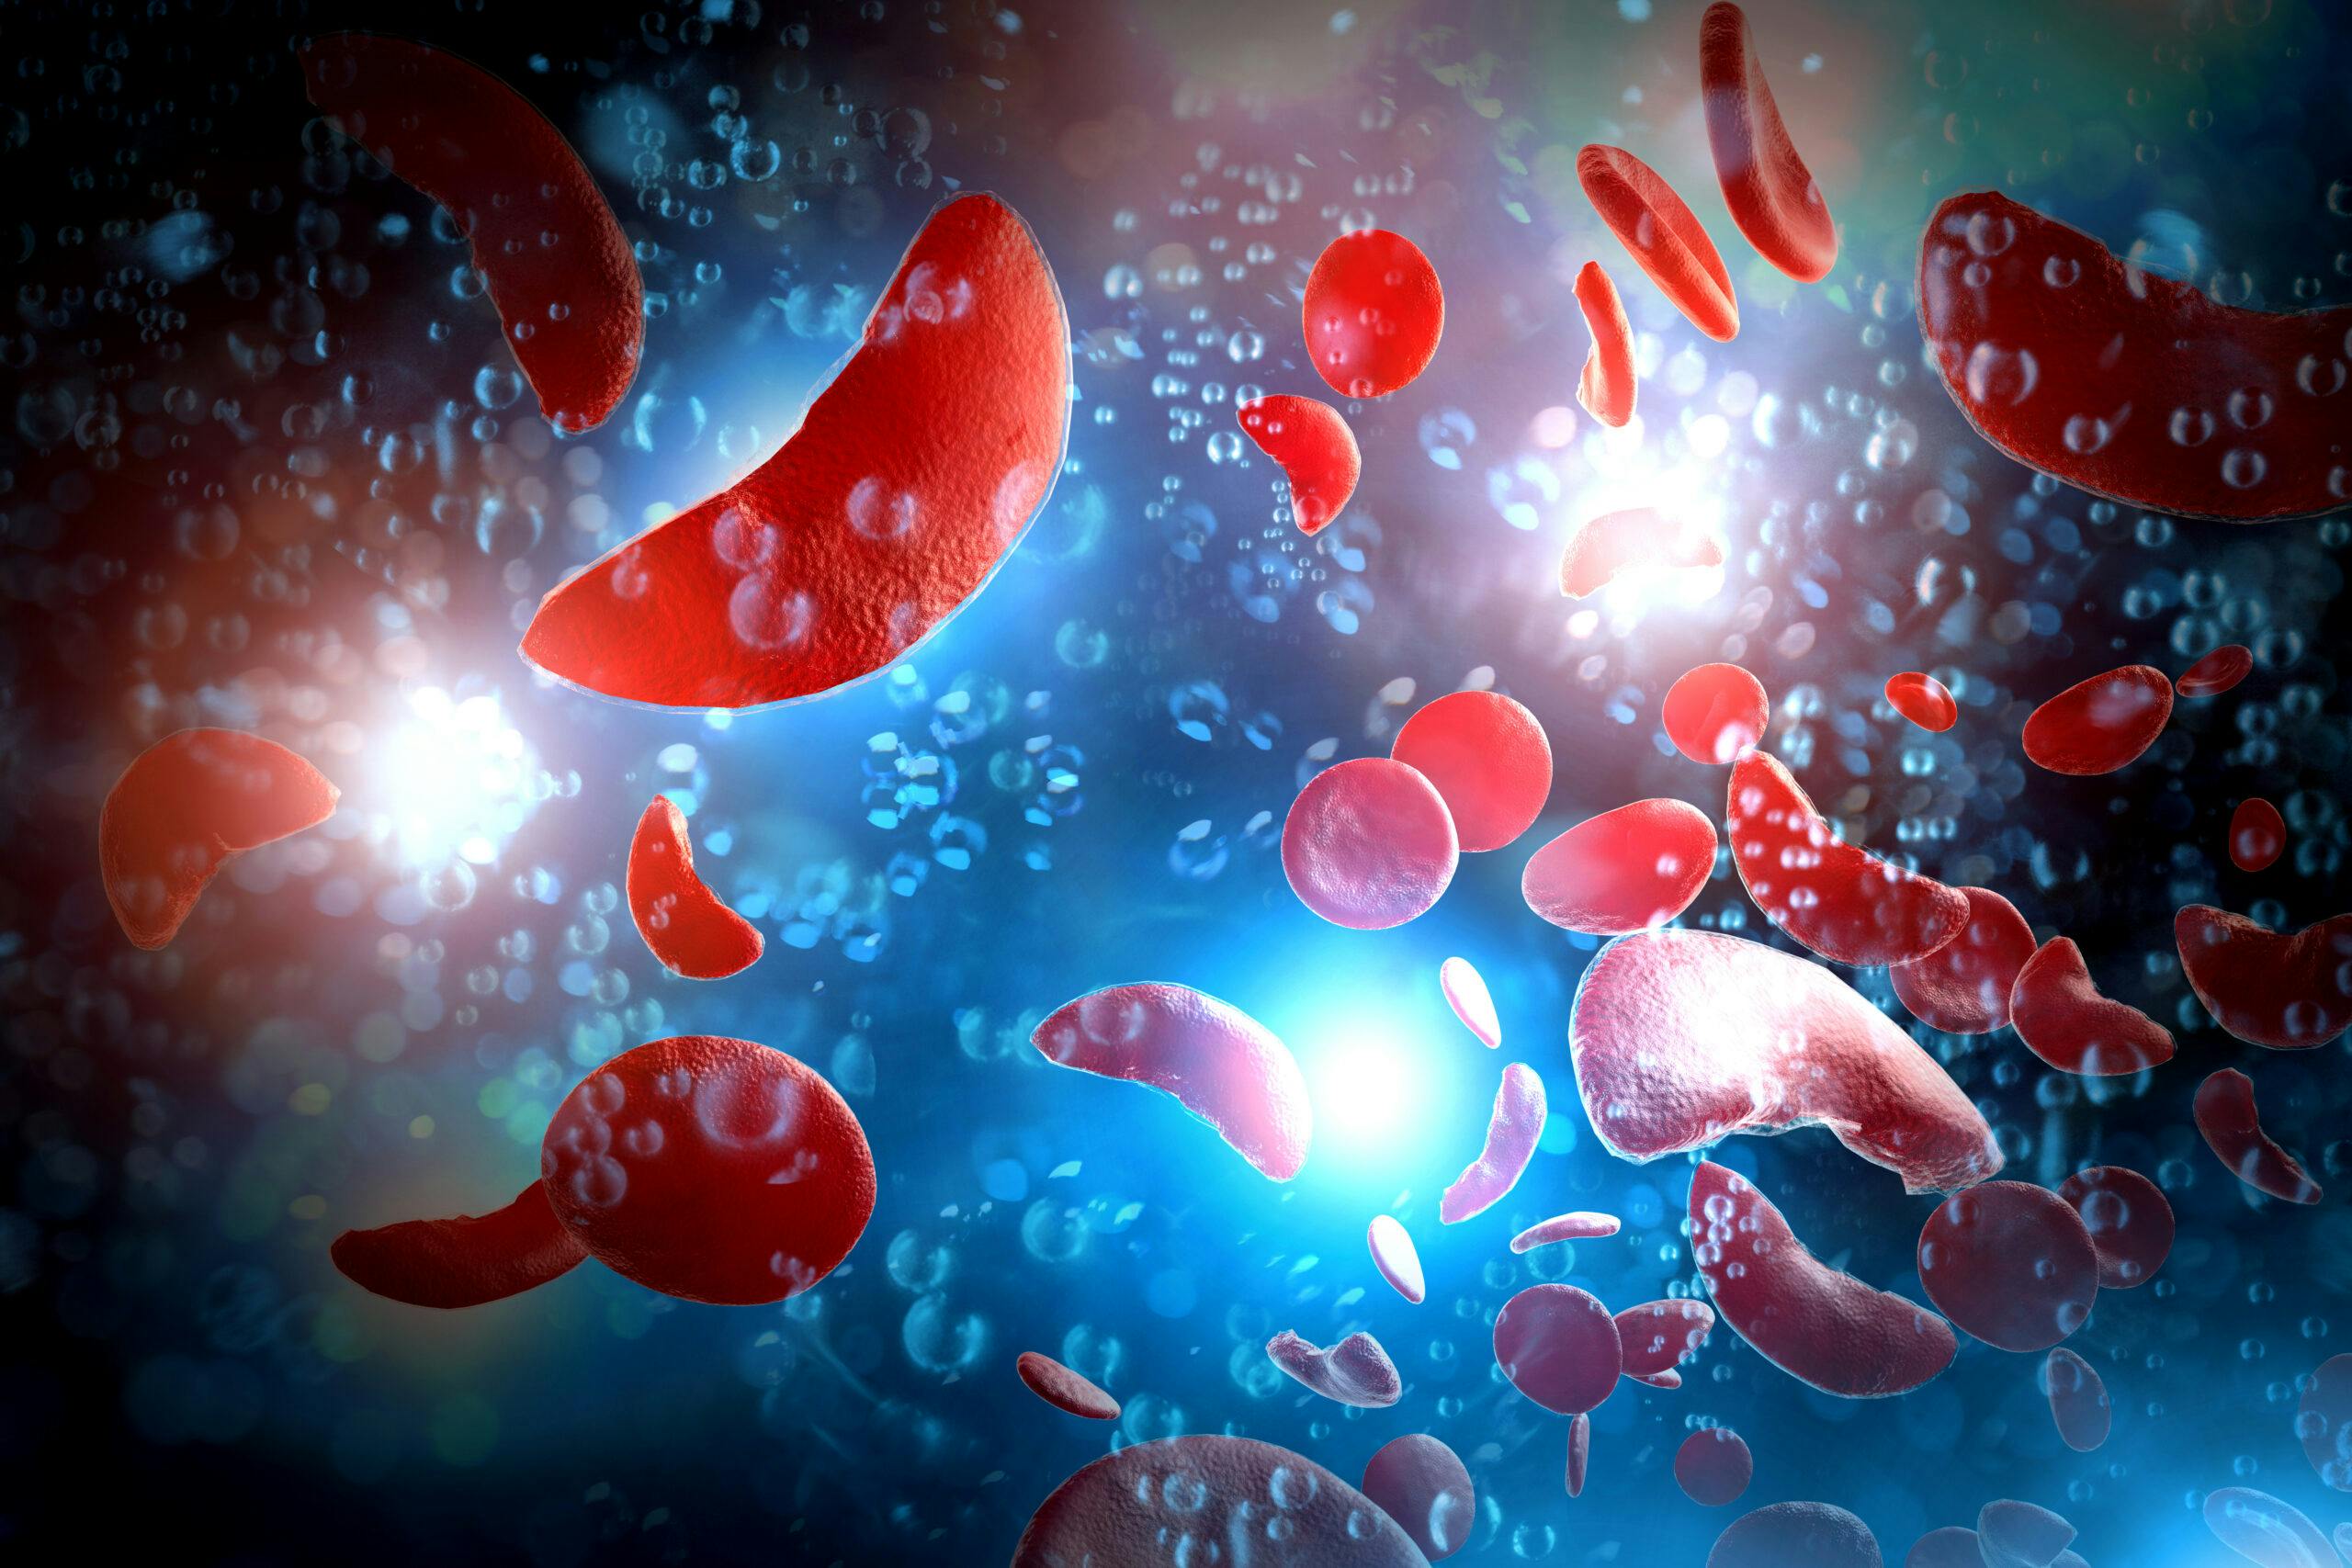 Sickle,Cell,Anemia,Disease,(scd),Blood,Cells,3d,Illustration